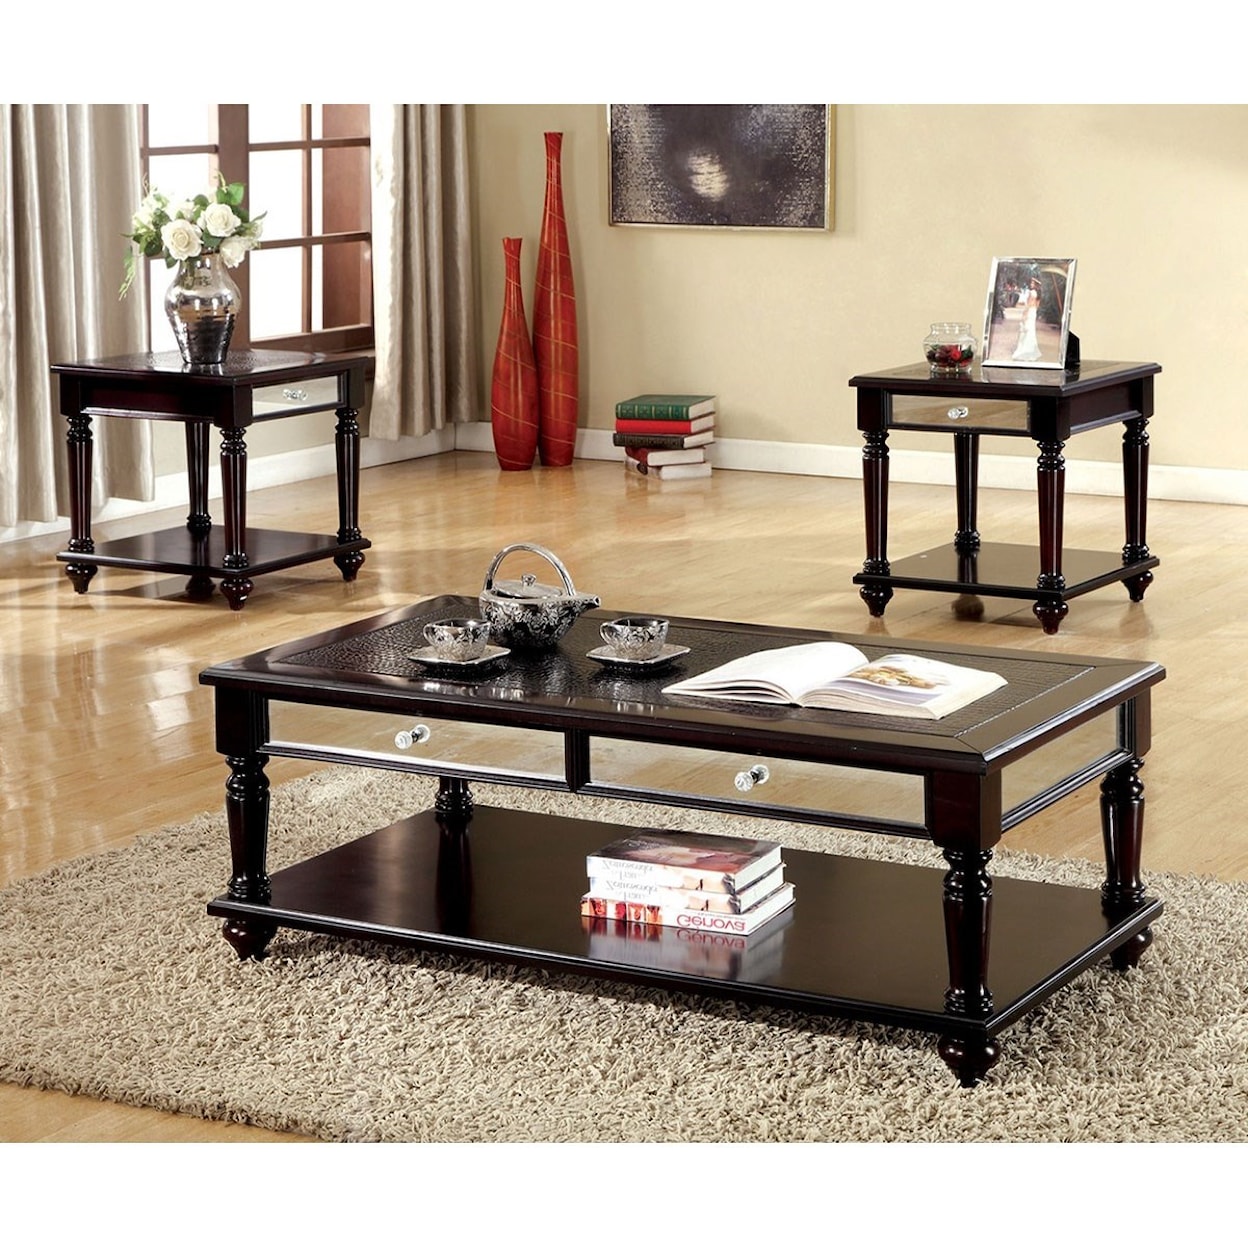 Furniture of America Horace 3 Pc. Table Set